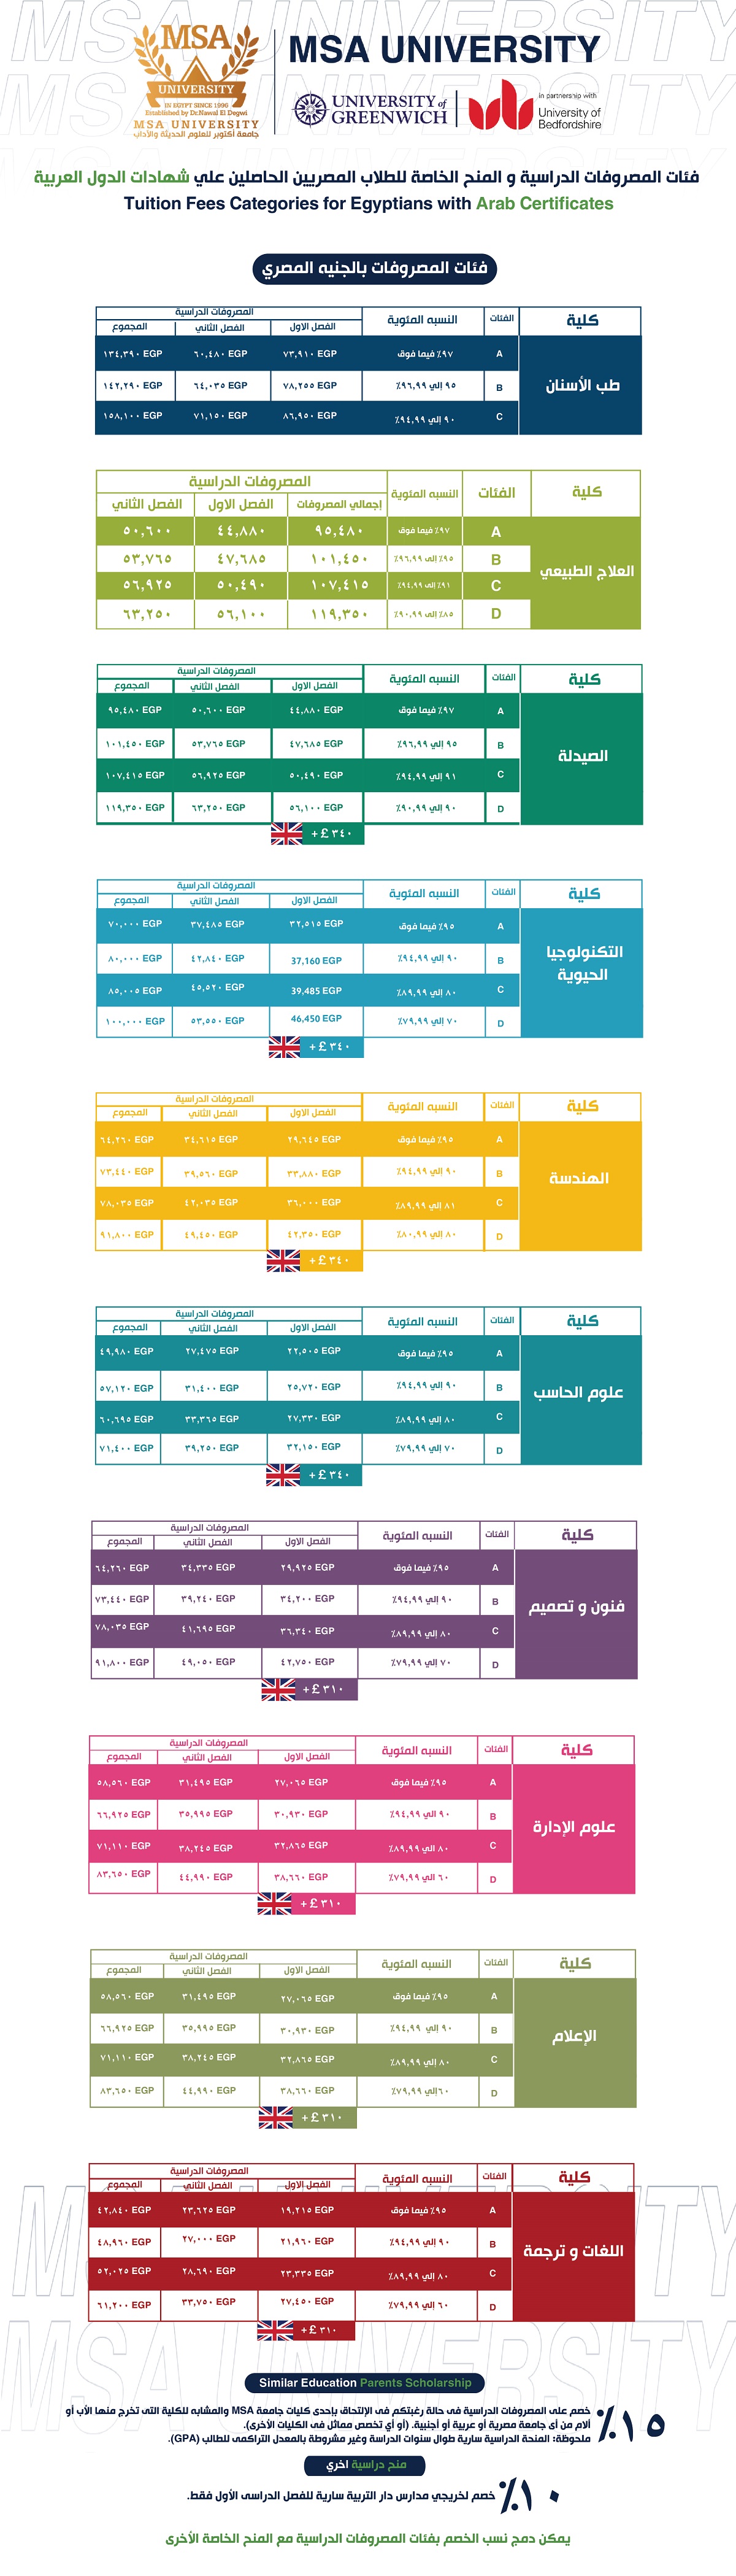 New Applicants Tuition Fees & Scholarships 2021-2022 for Arab Certifictes